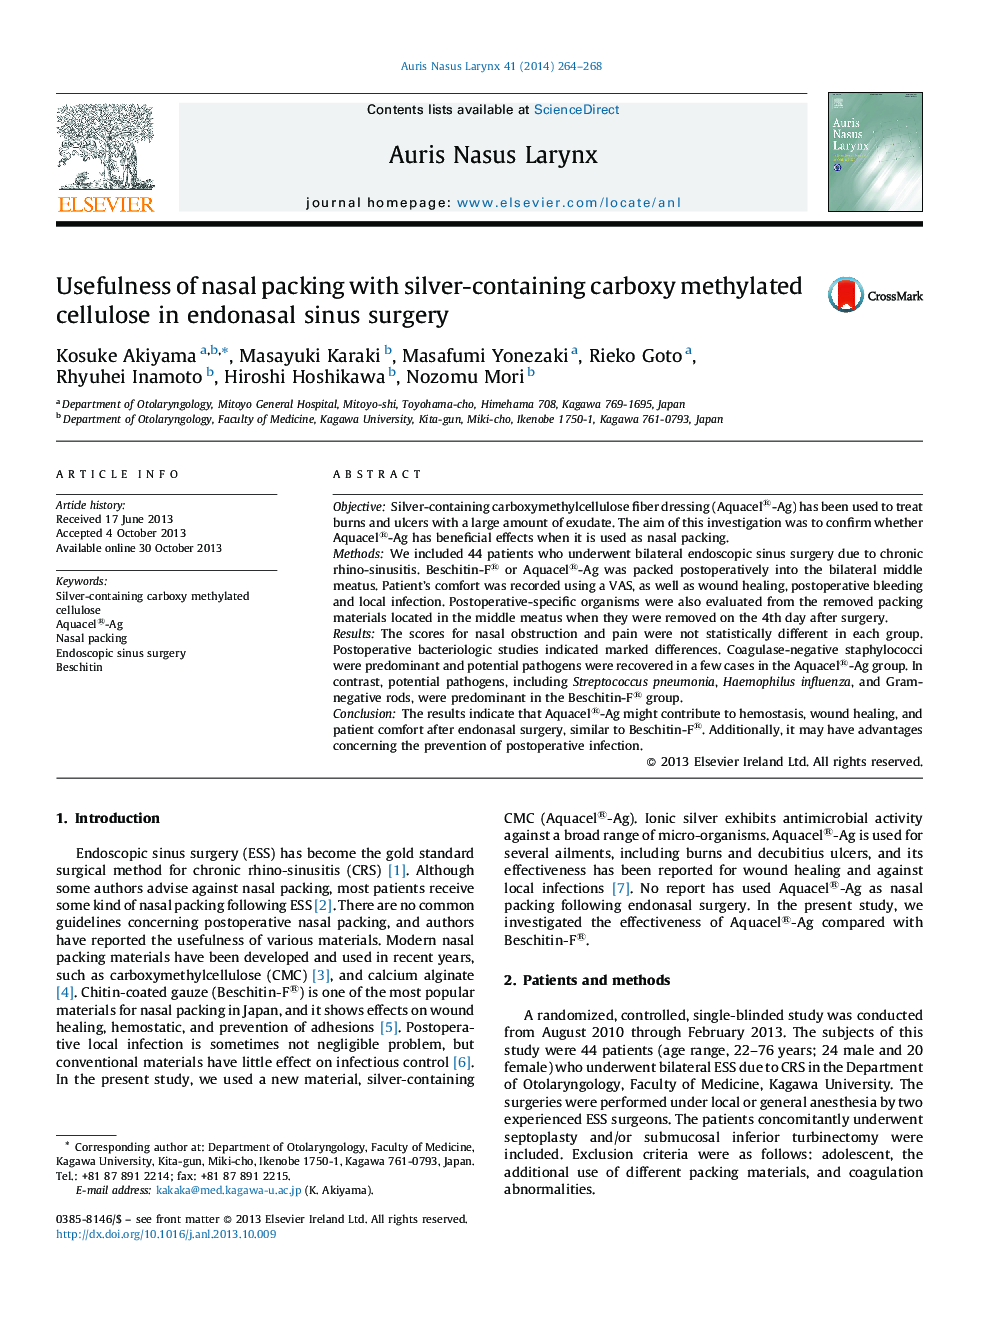 Usefulness of nasal packing with silver-containing carboxy methylated cellulose in endonasal sinus surgery